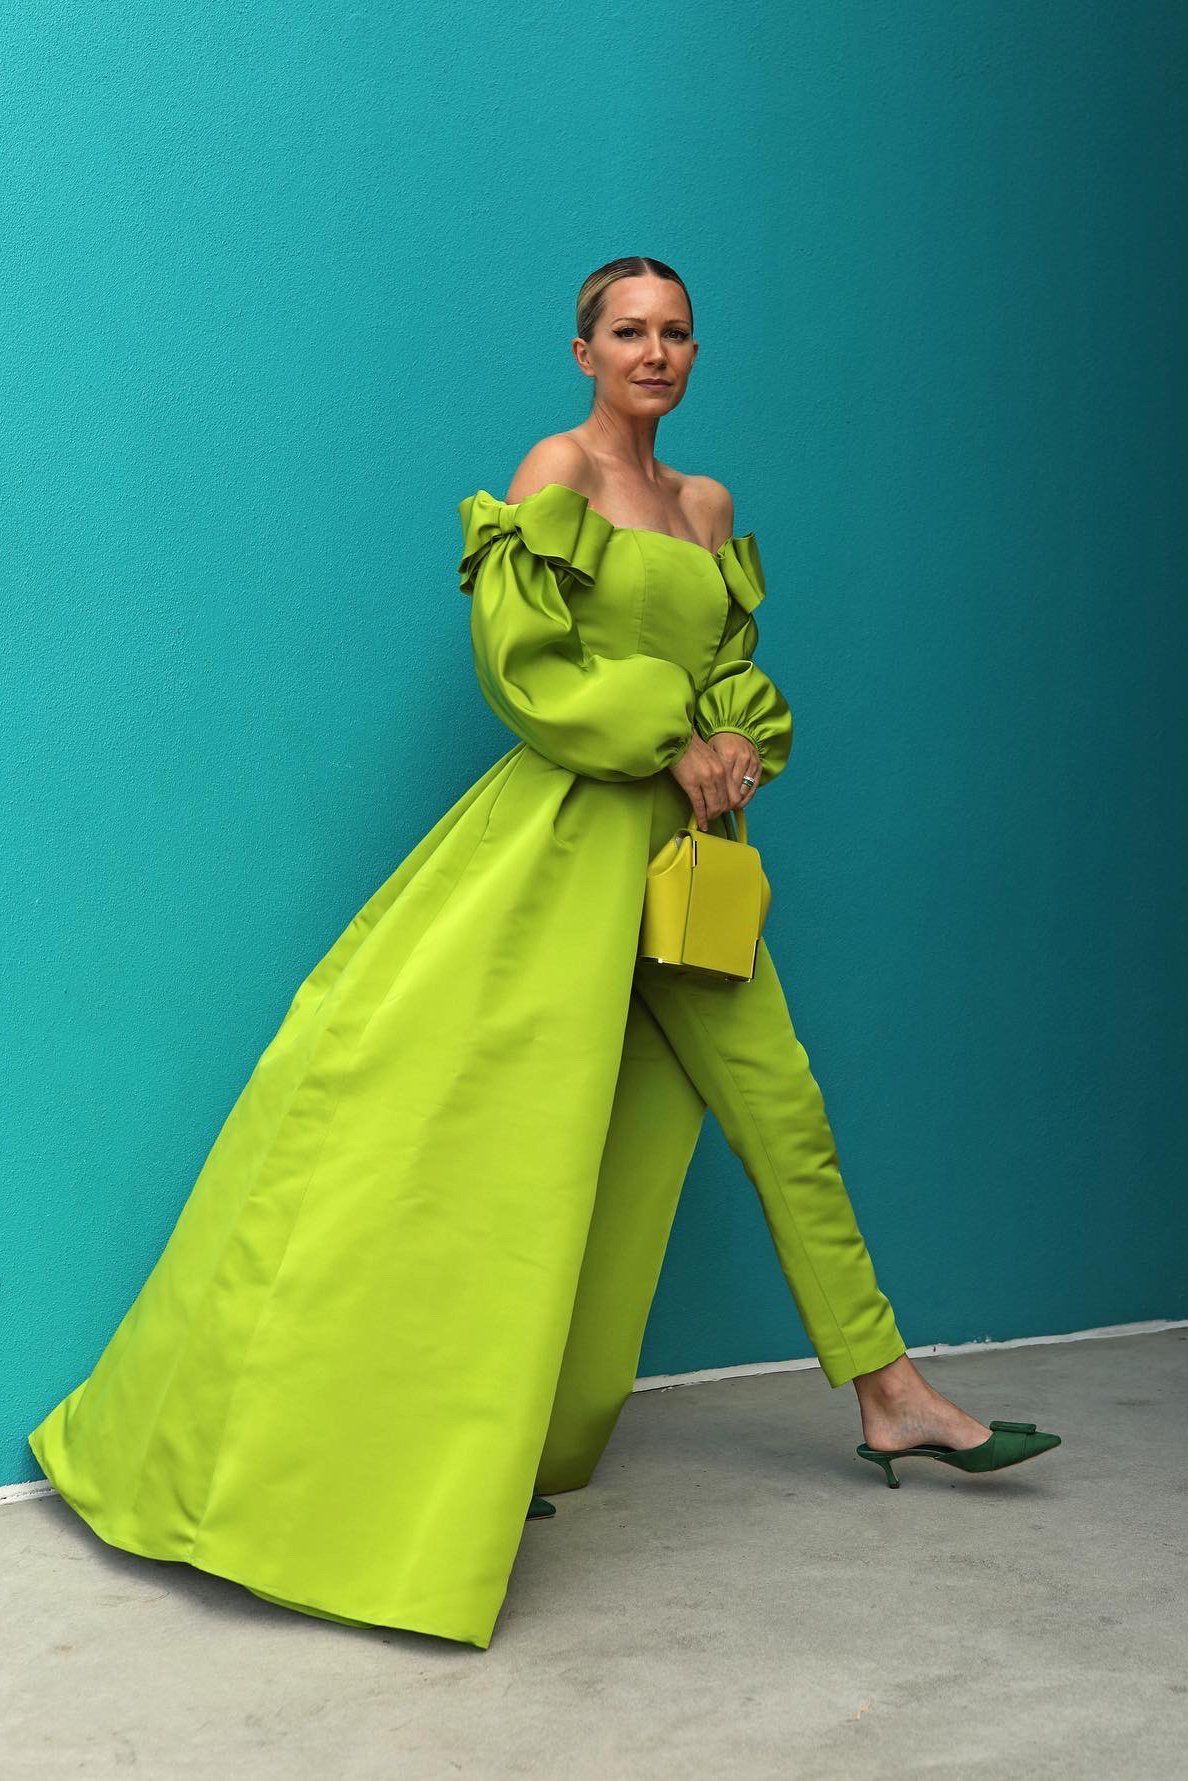 Green Outfit Ideas: 10 Favorite Pieces of Green Clothing